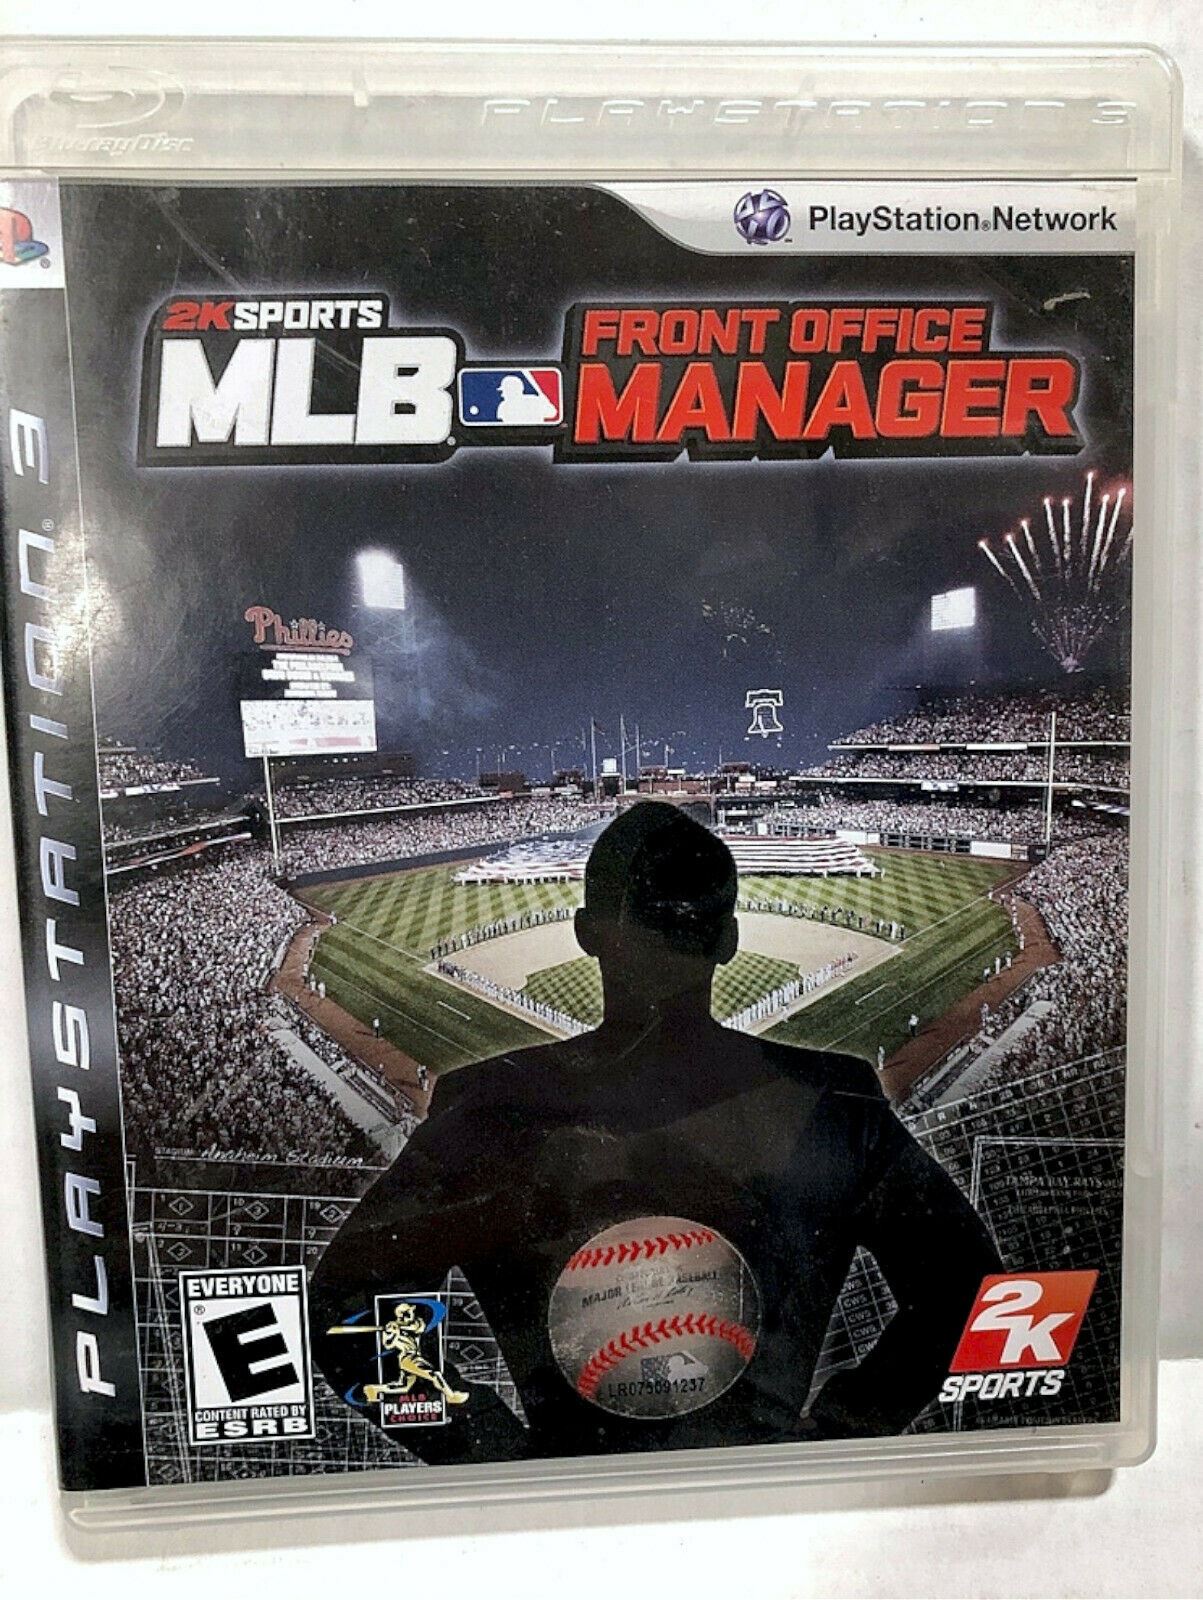 MLB Front Office Manager PlayStation 3 Video Game 2K Sports Baseball PS3 [Used/Refurbished]